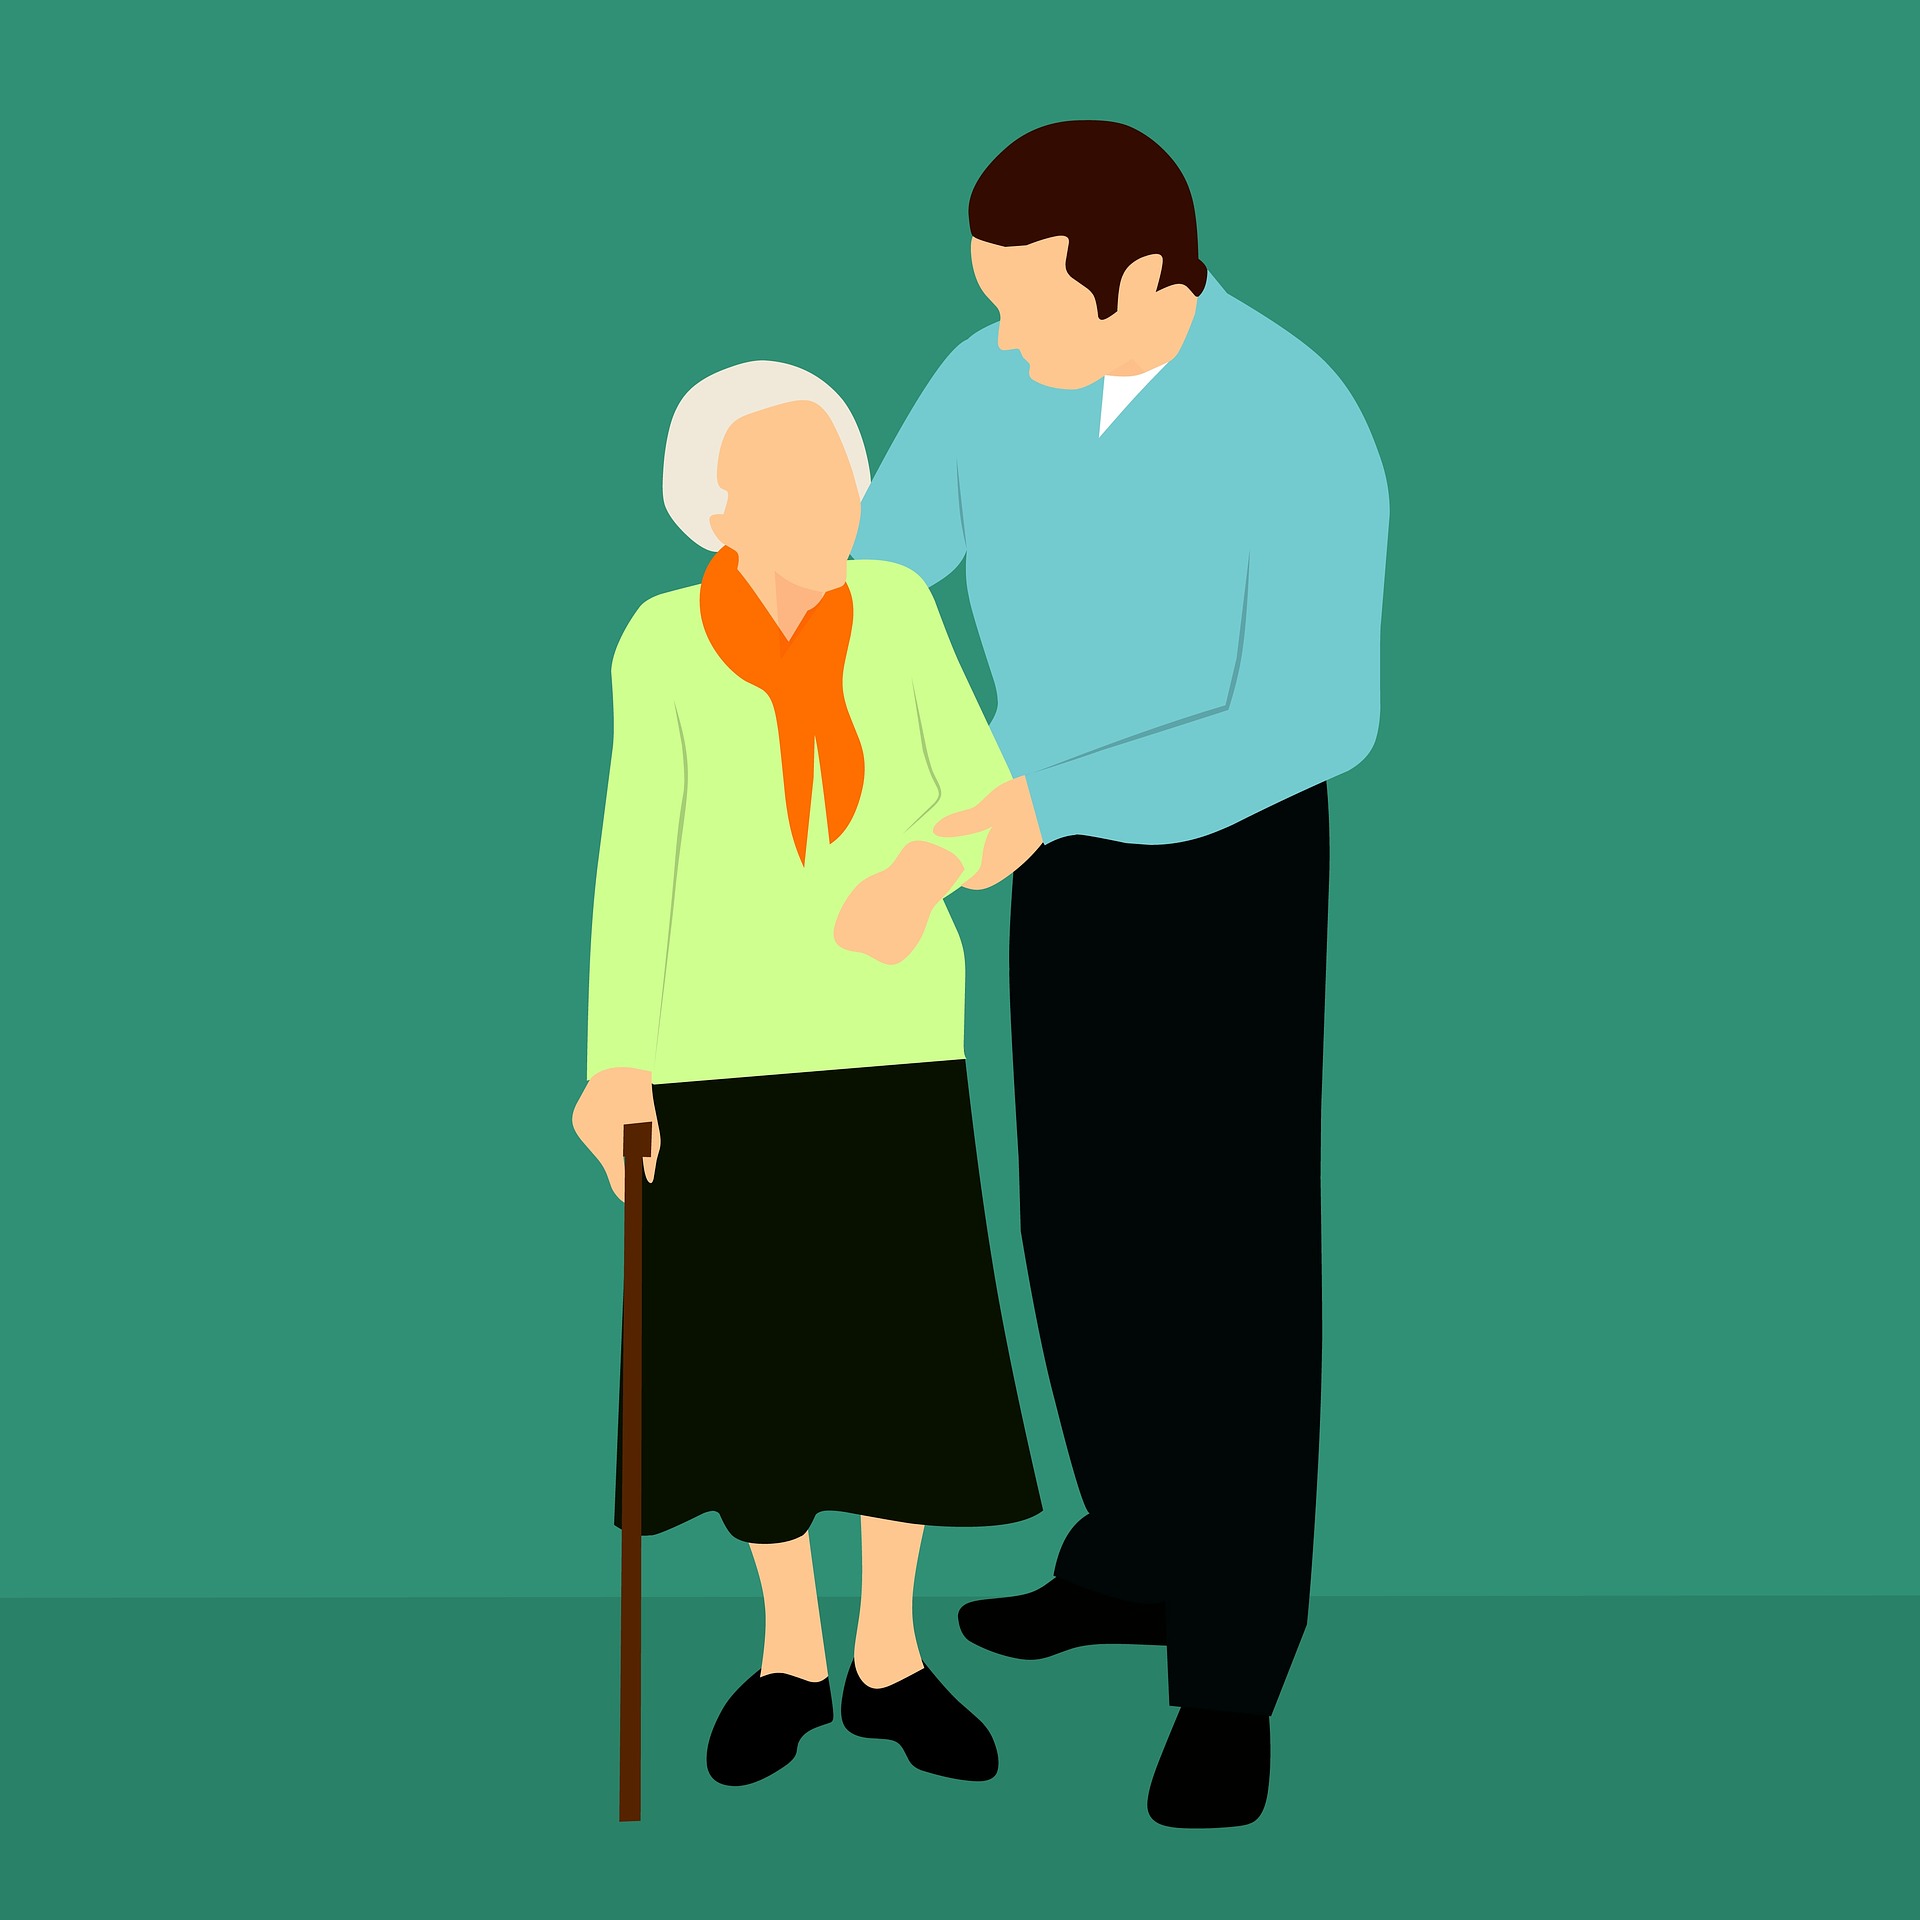 Illustration shows a younger man holding the elbow of an older lady who is walking with a stick